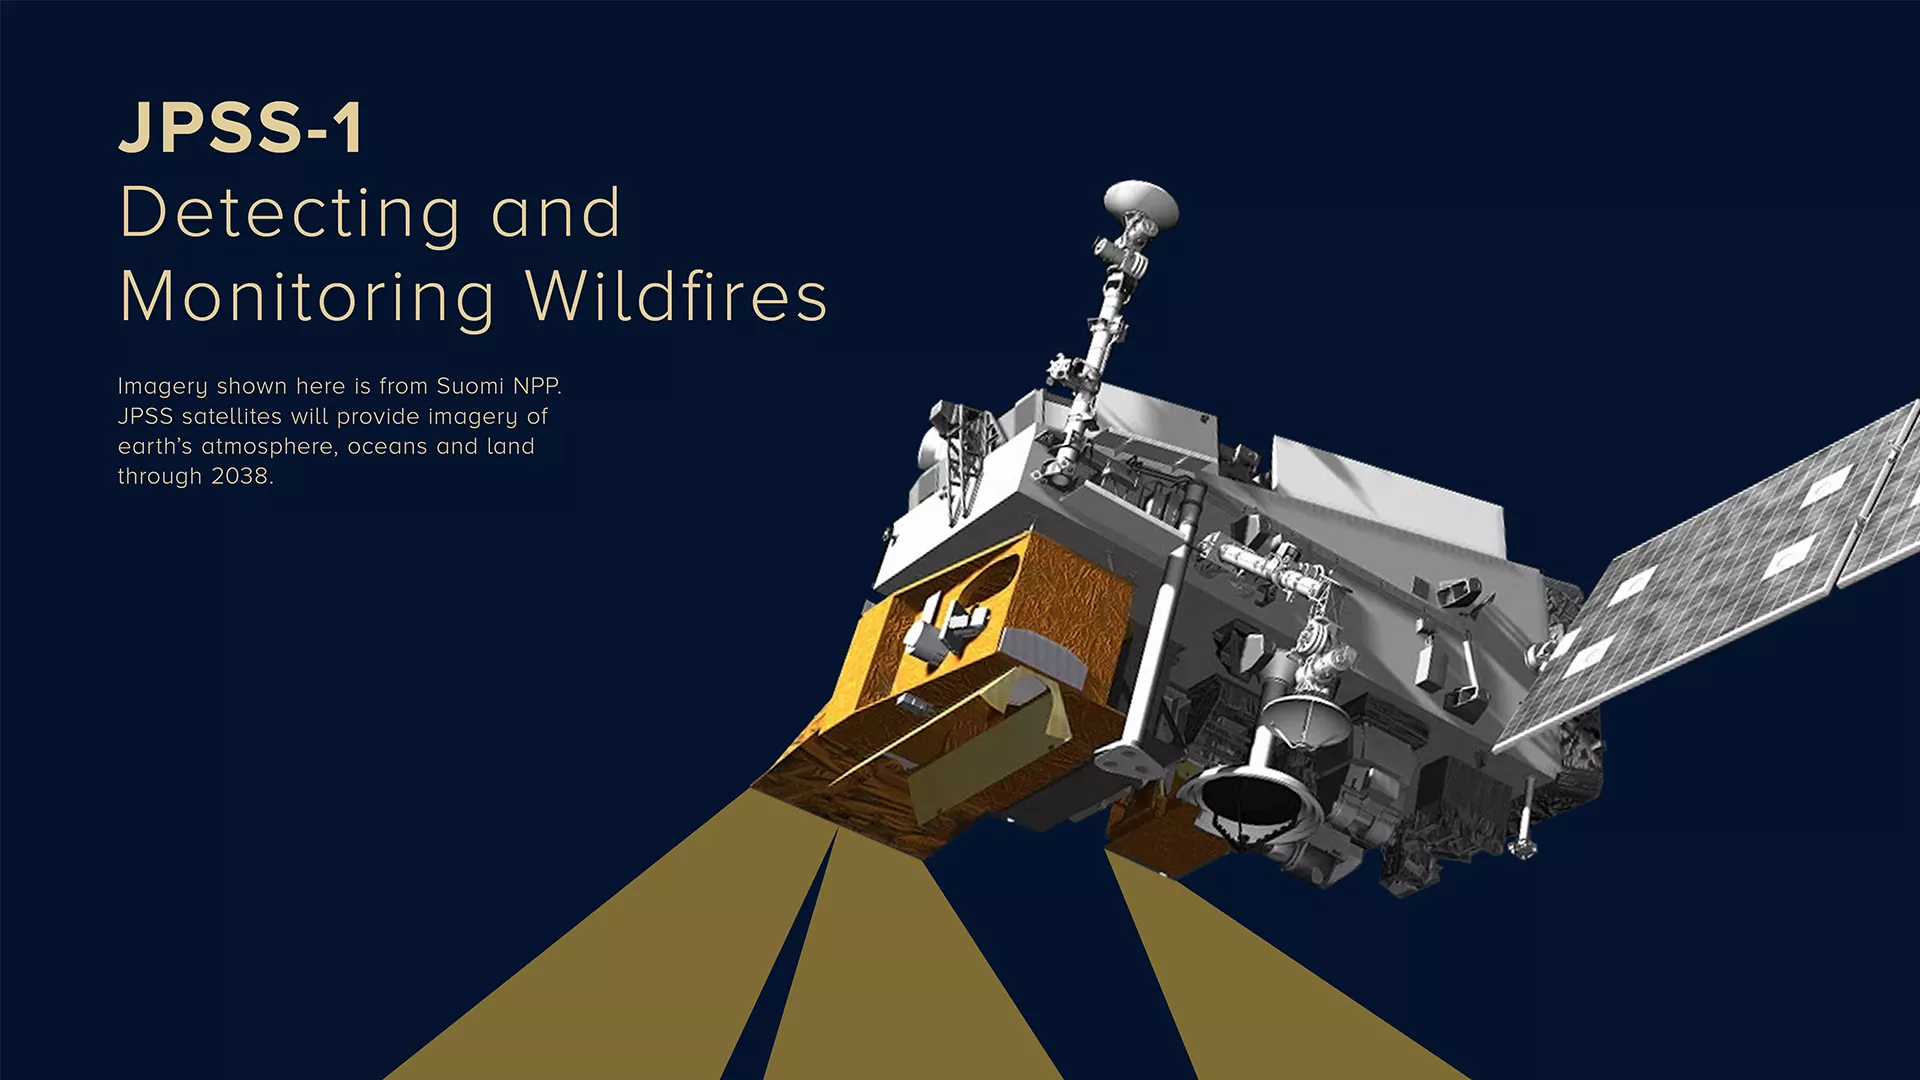 Illustration of JPSS-1 detecting wildfires